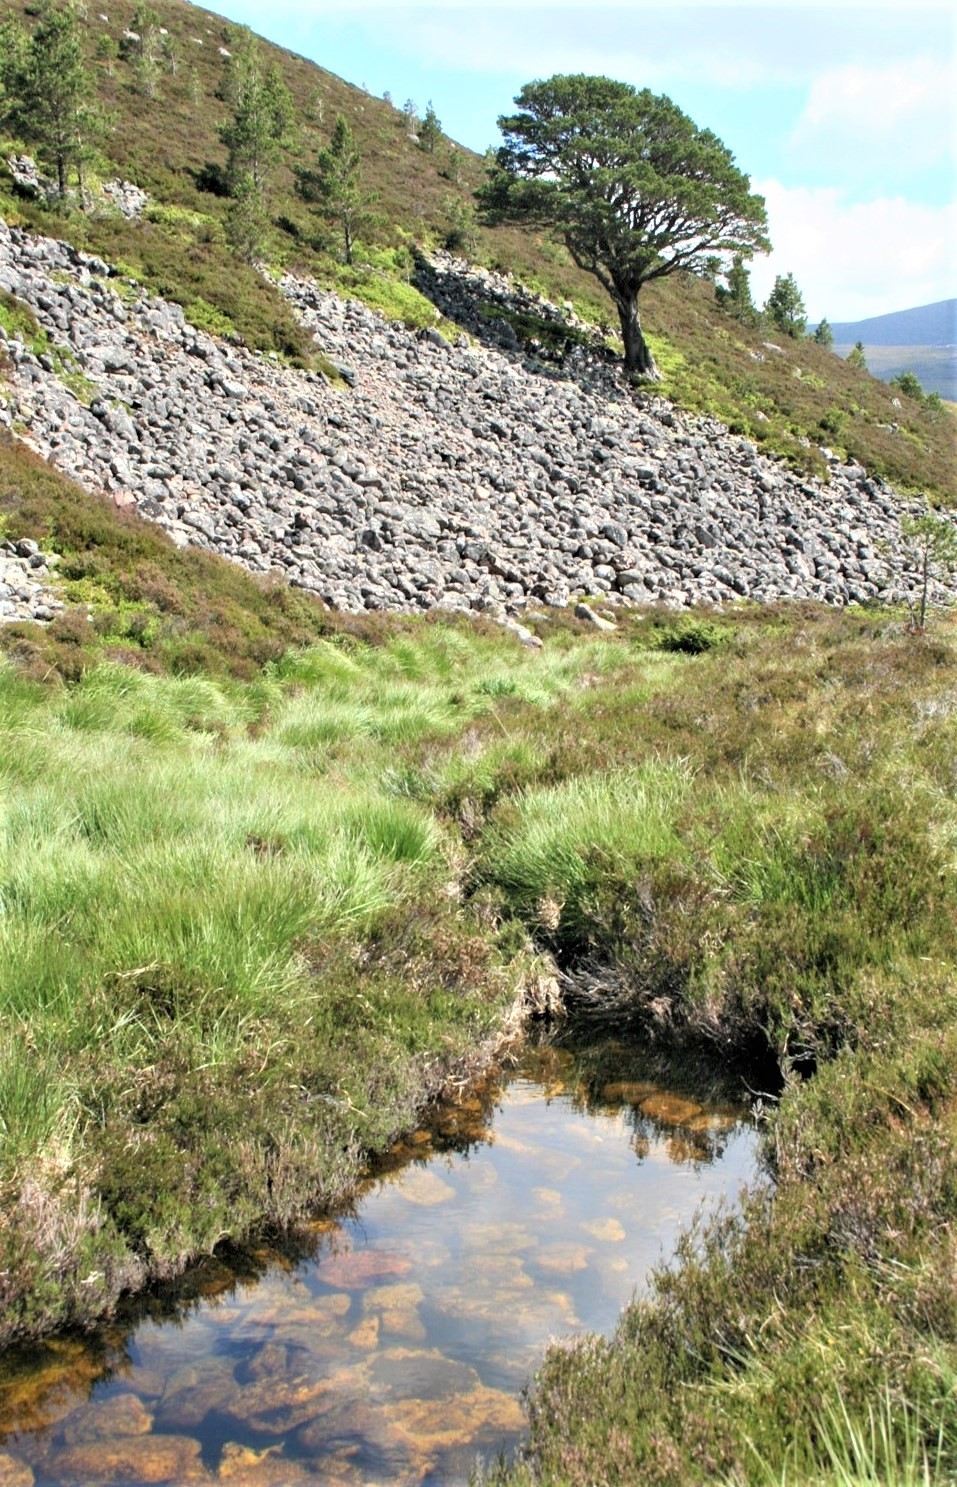 The 'Blind' Streams of the Uplands